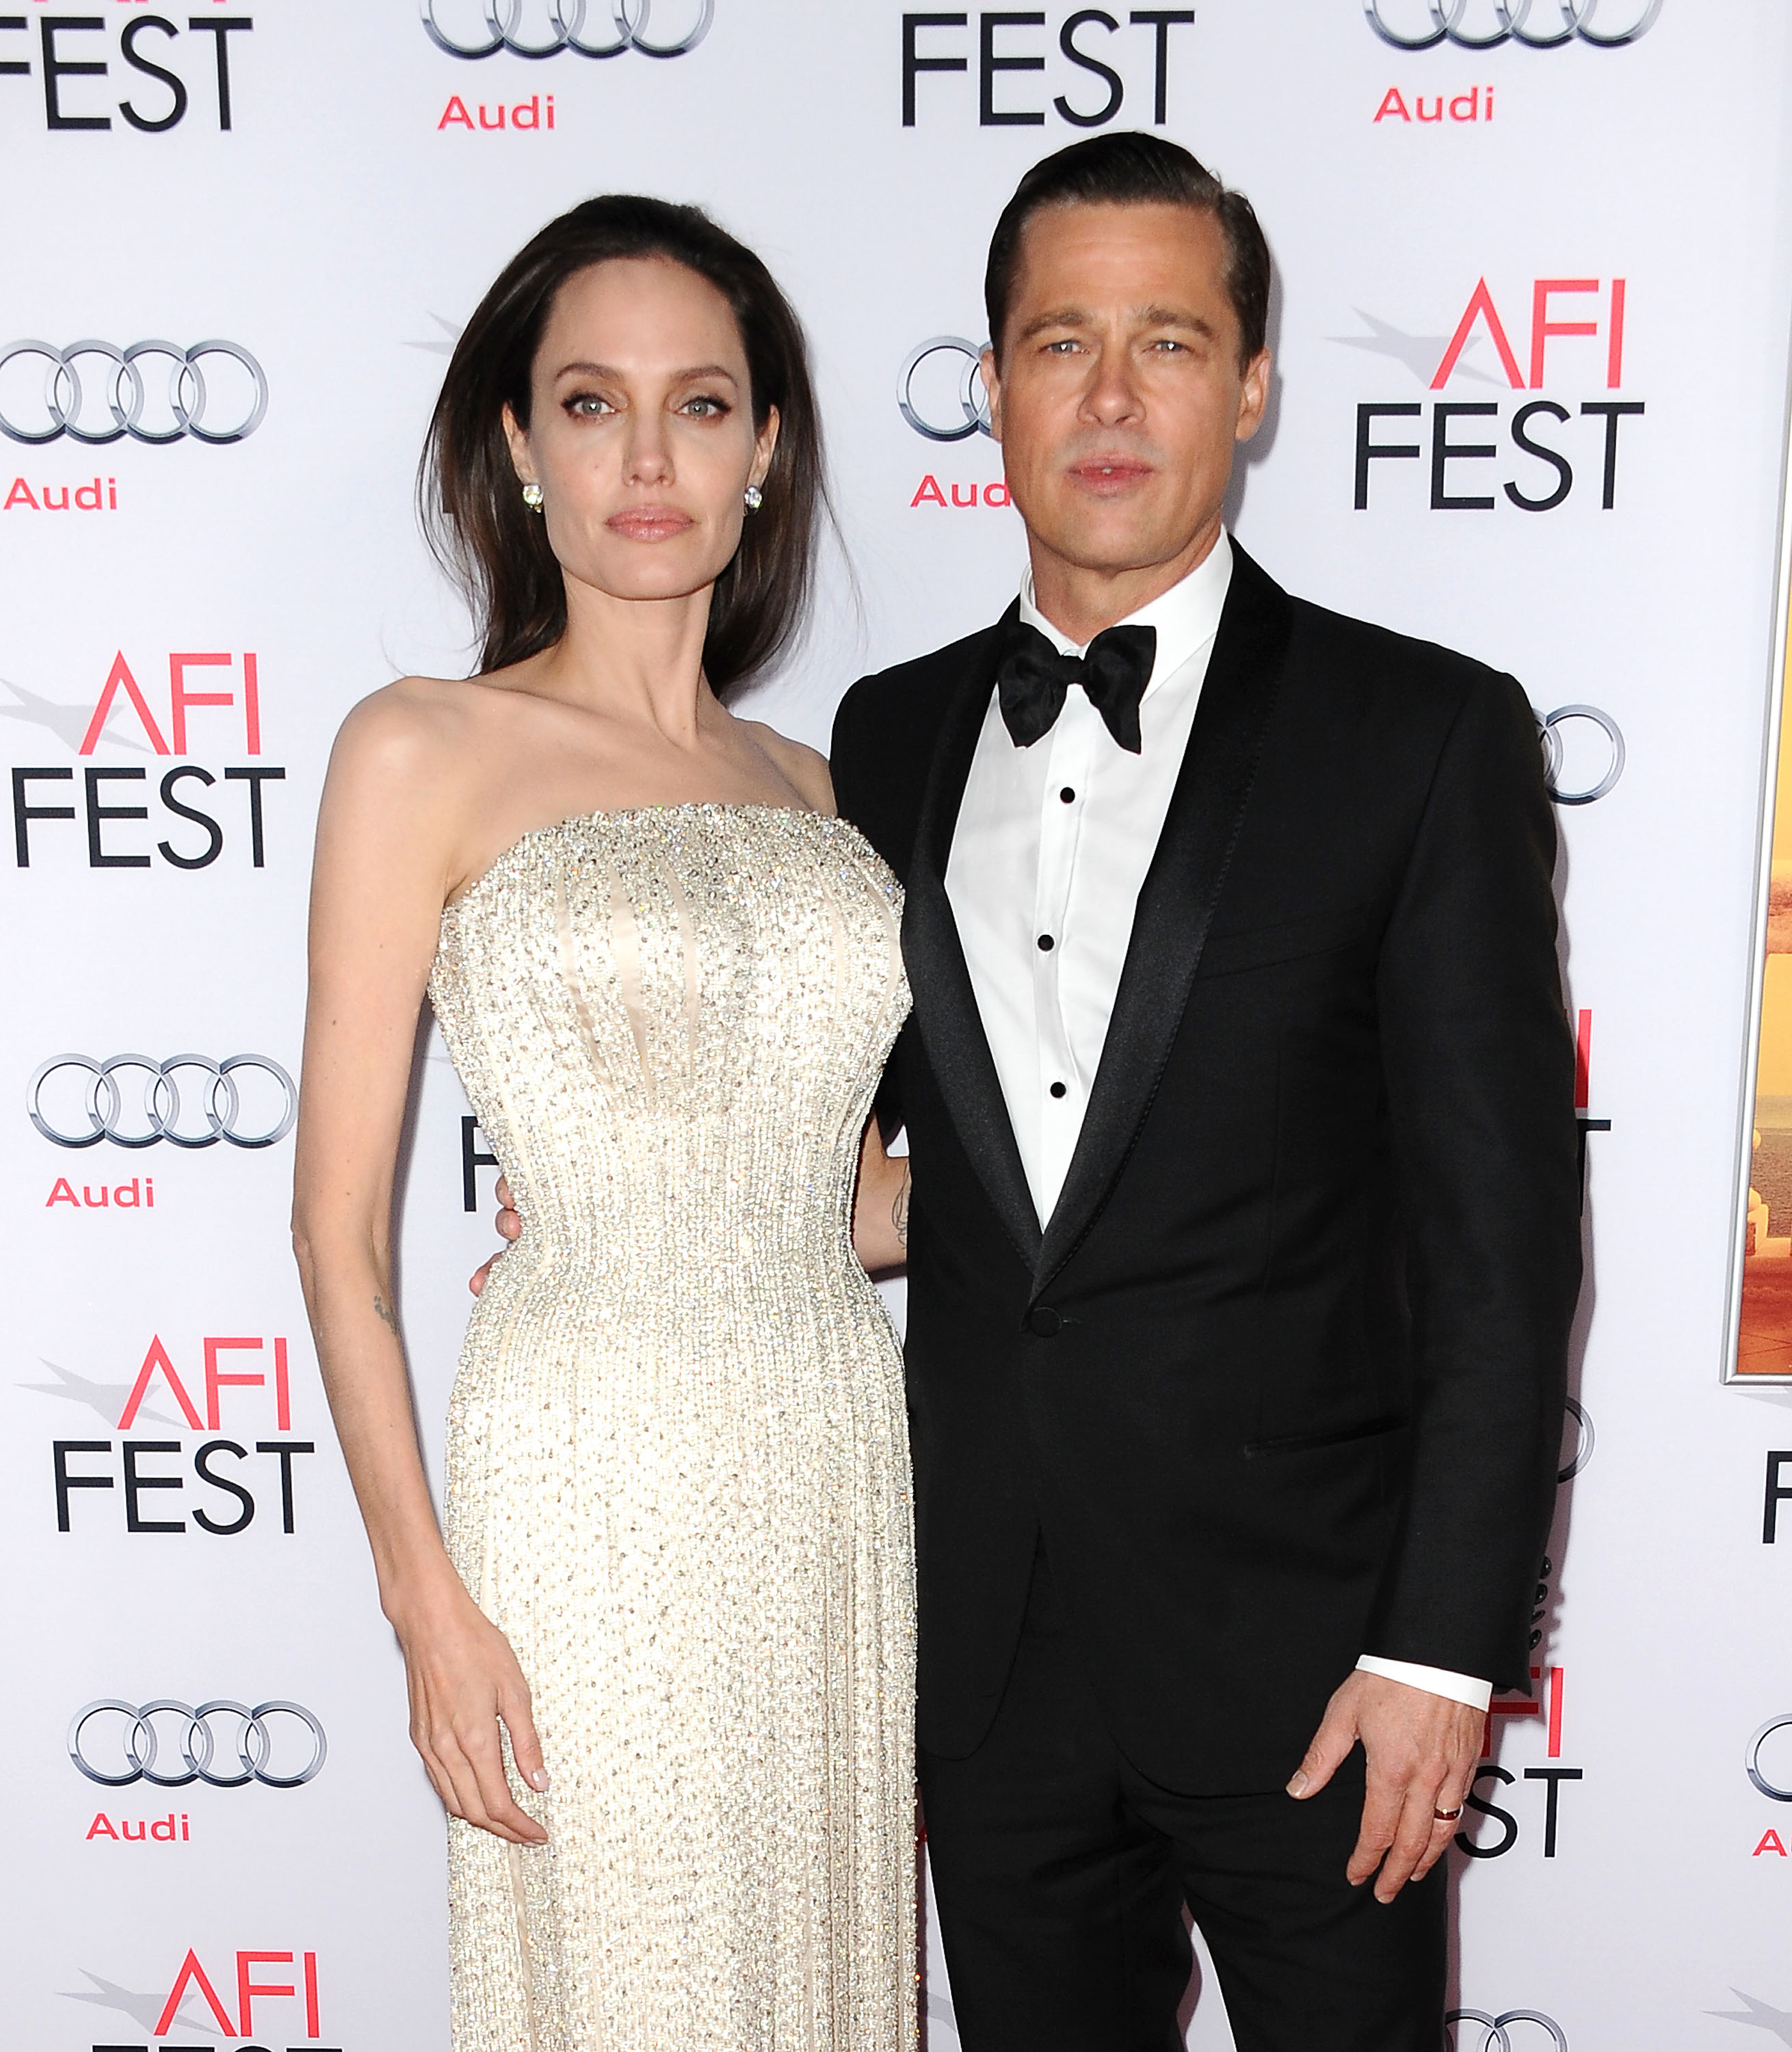 Angelina Jolie and Brad Pitt attend the premiere of "By the Sea" at the 2015 AFI Fest at TCL Chinese 6 Theatres on November 5, 2015 in Hollywood, California | Source: Getty Images